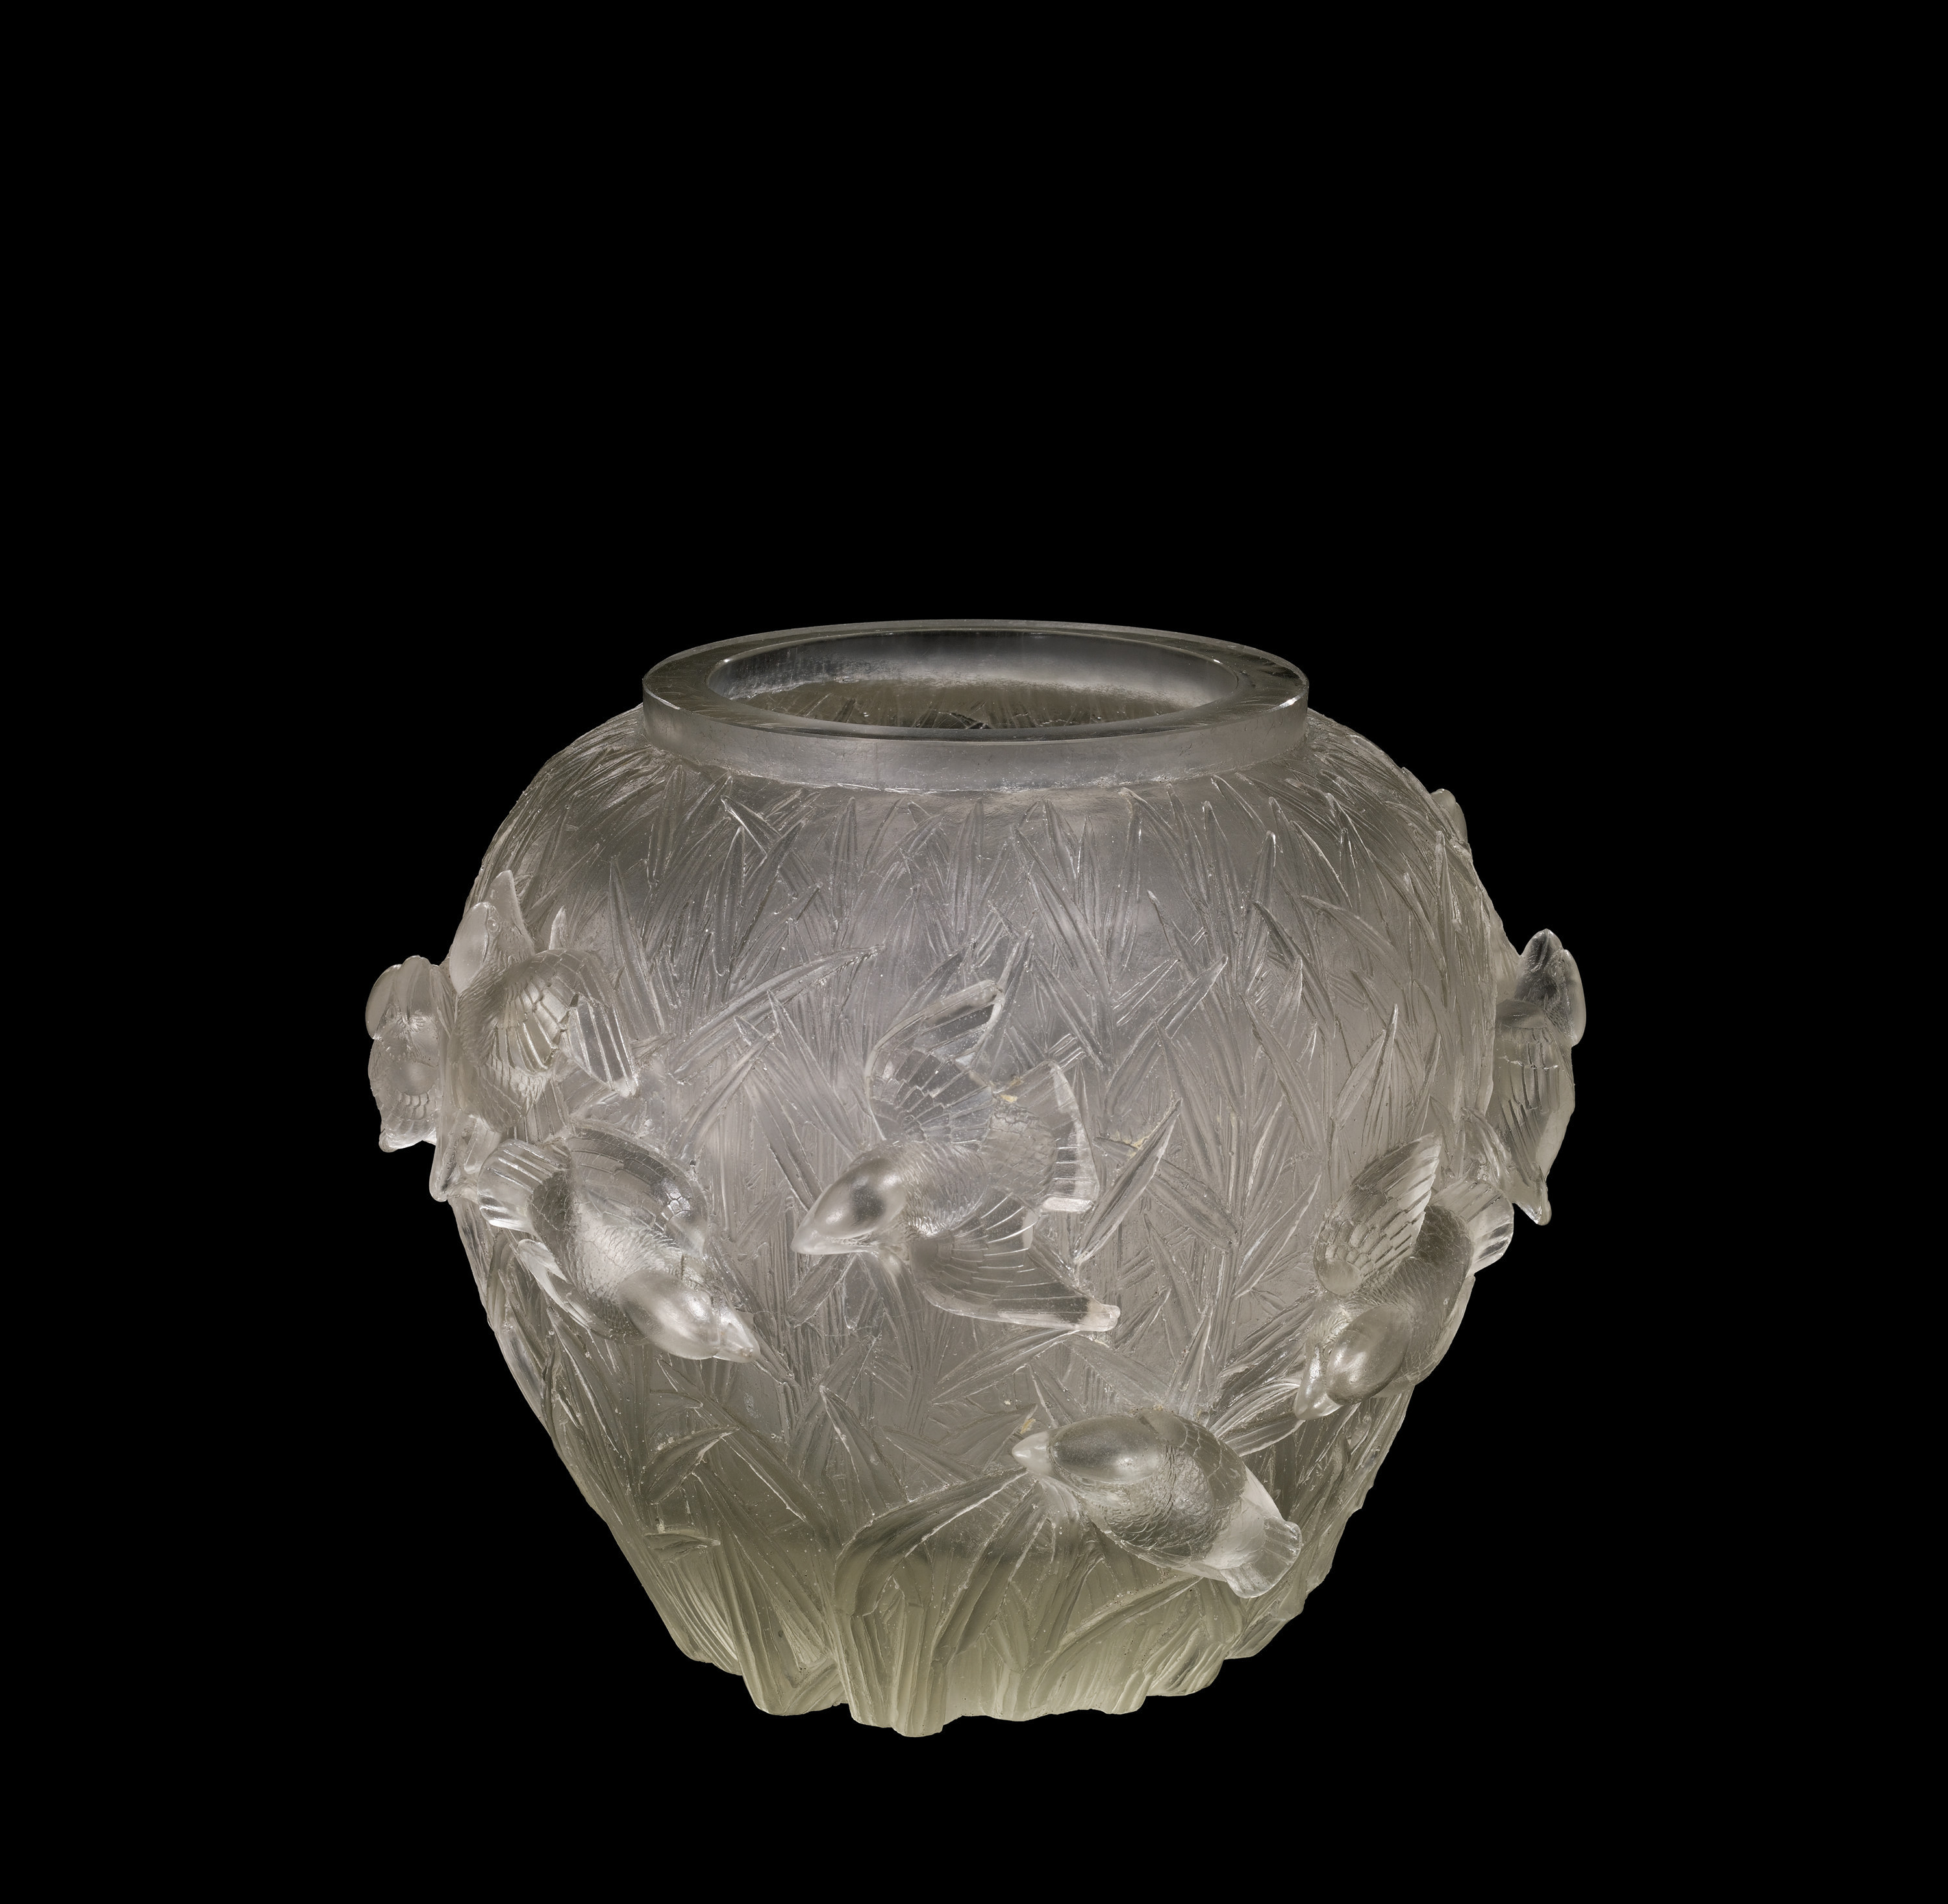 14 Lovely Lalique Dampierre Vase 2024 free download lalique dampierre vase of press center corning museum of glass with contact us